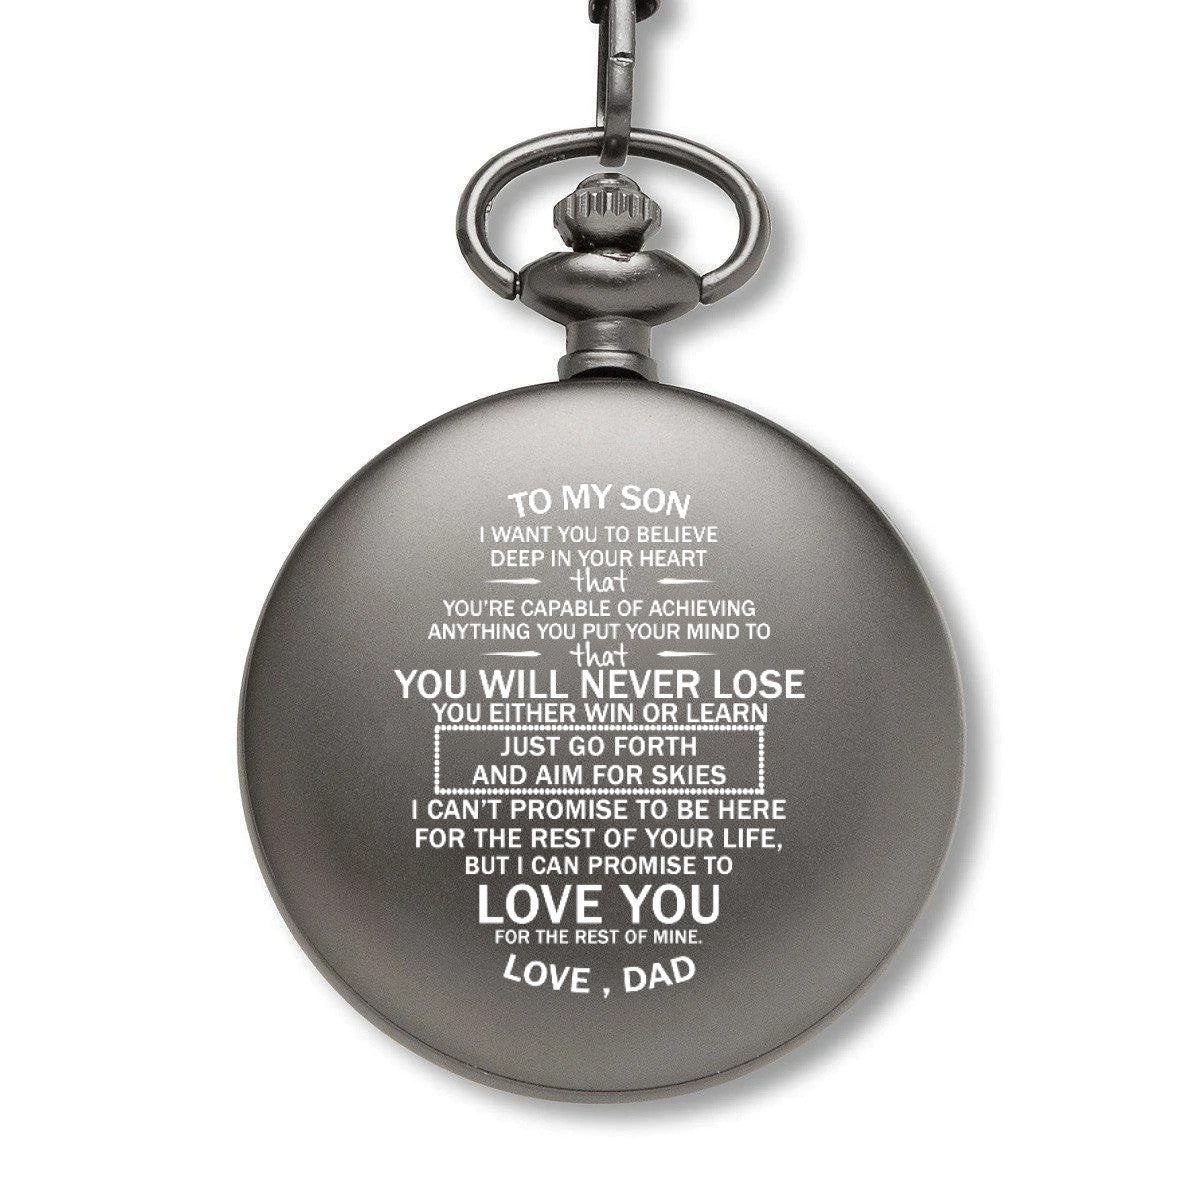 To My Son Love Dad Pocket Watch